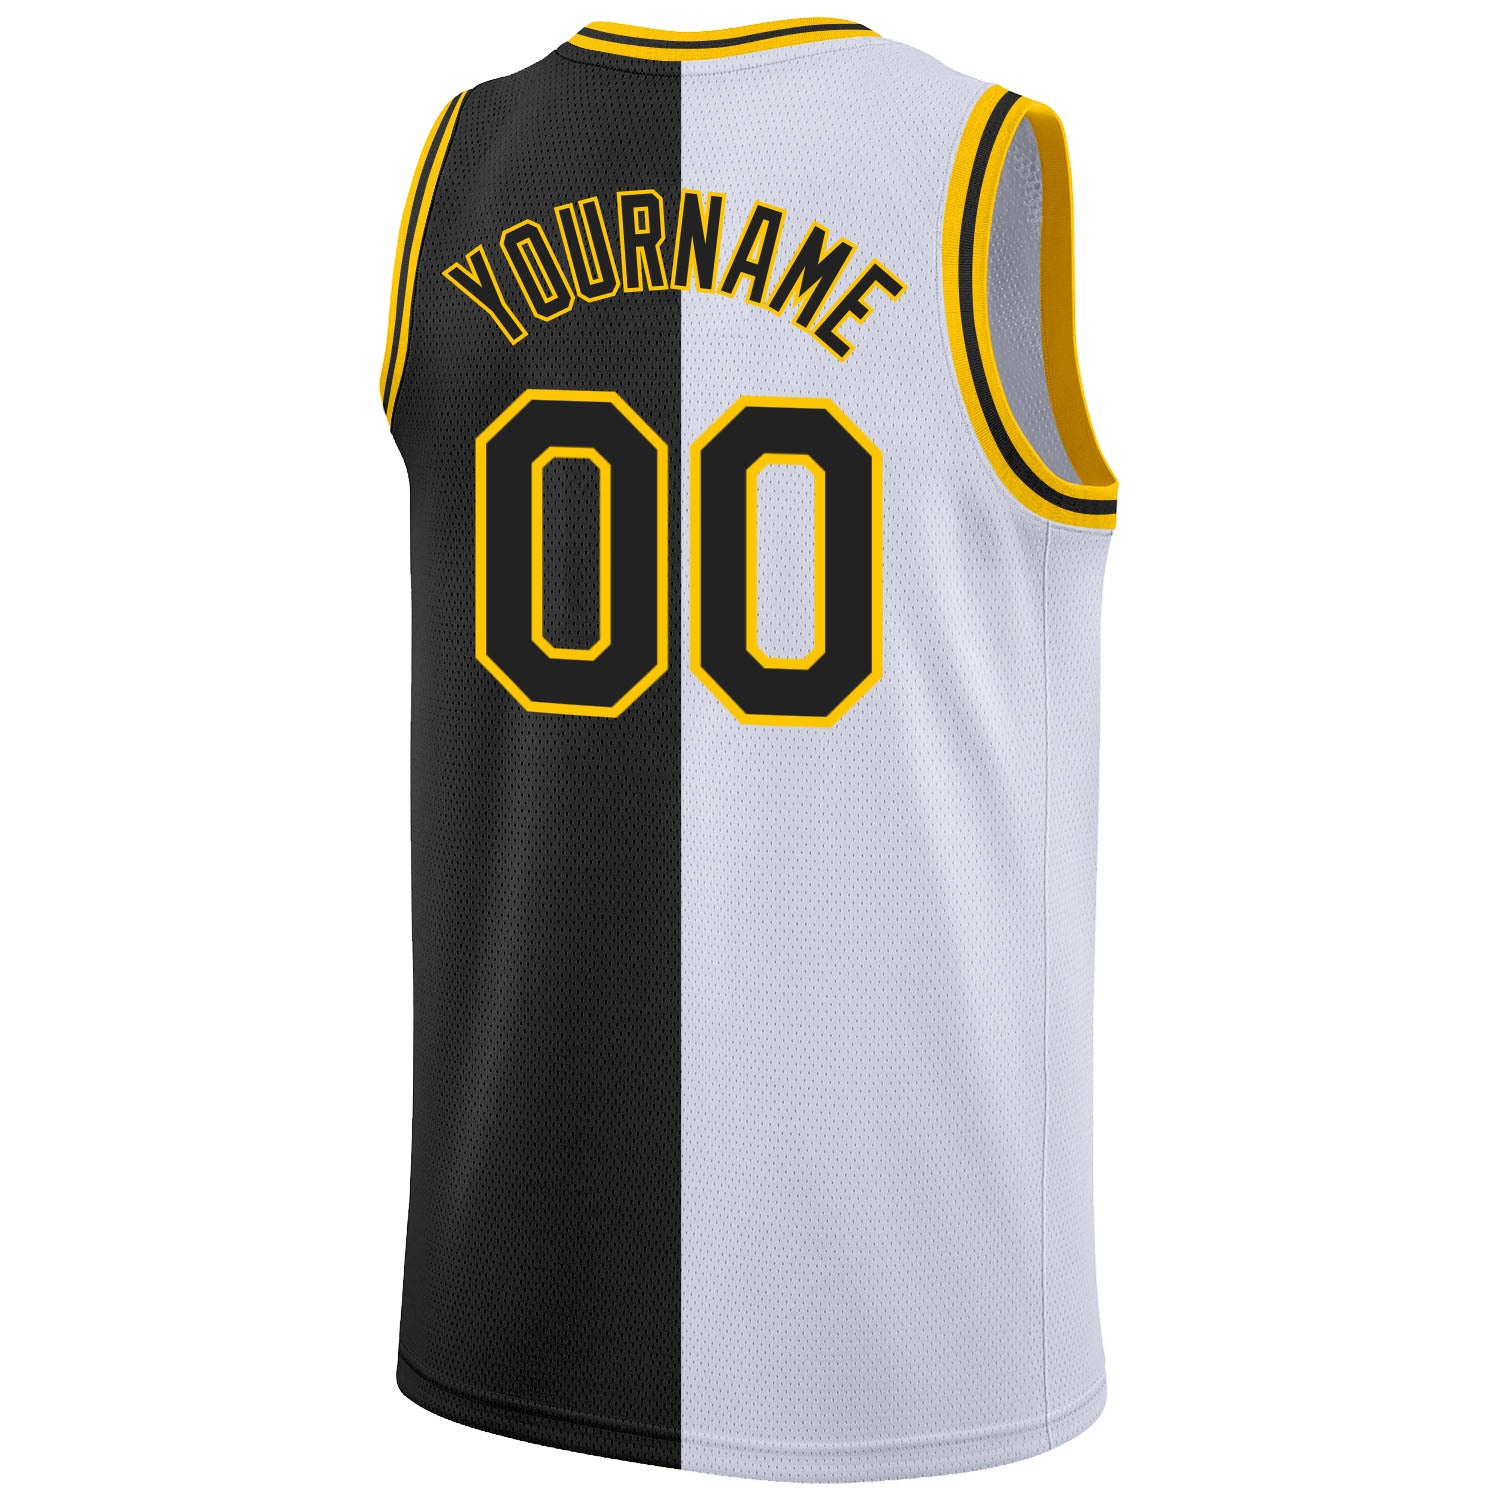  Economy Reversible Custom Basketball Jersey Adult Small in Black  and Gold : Clothing, Shoes & Jewelry